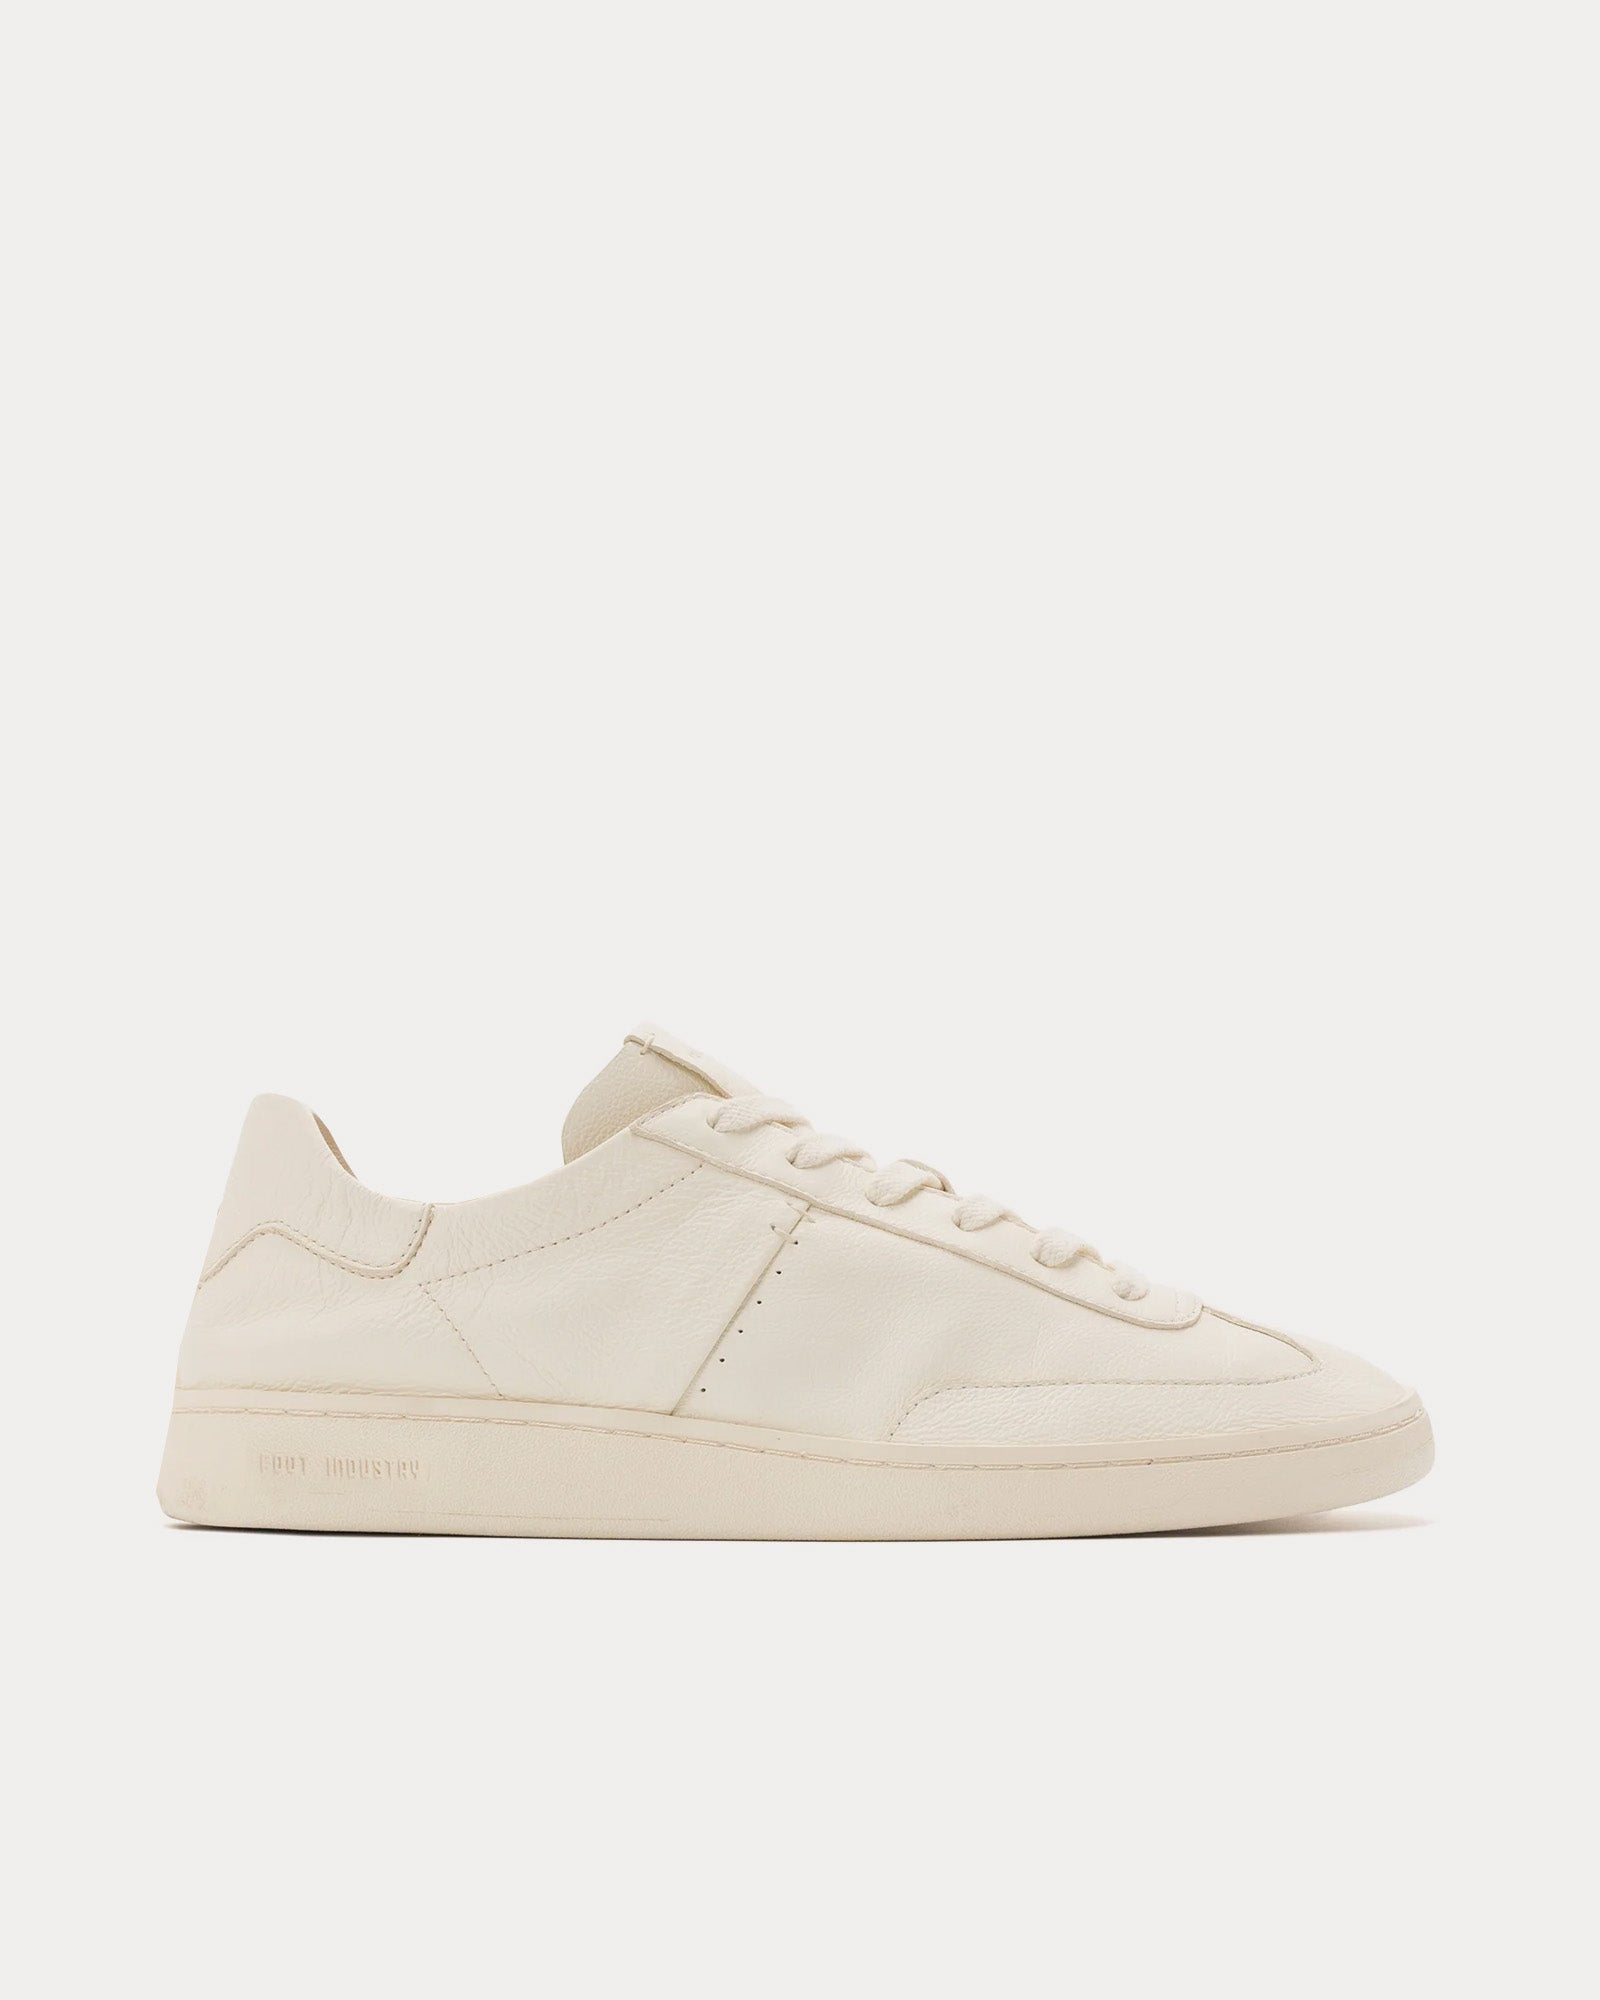 Foot Industry - GAT OP Leather Antique White Low Top Sneakers